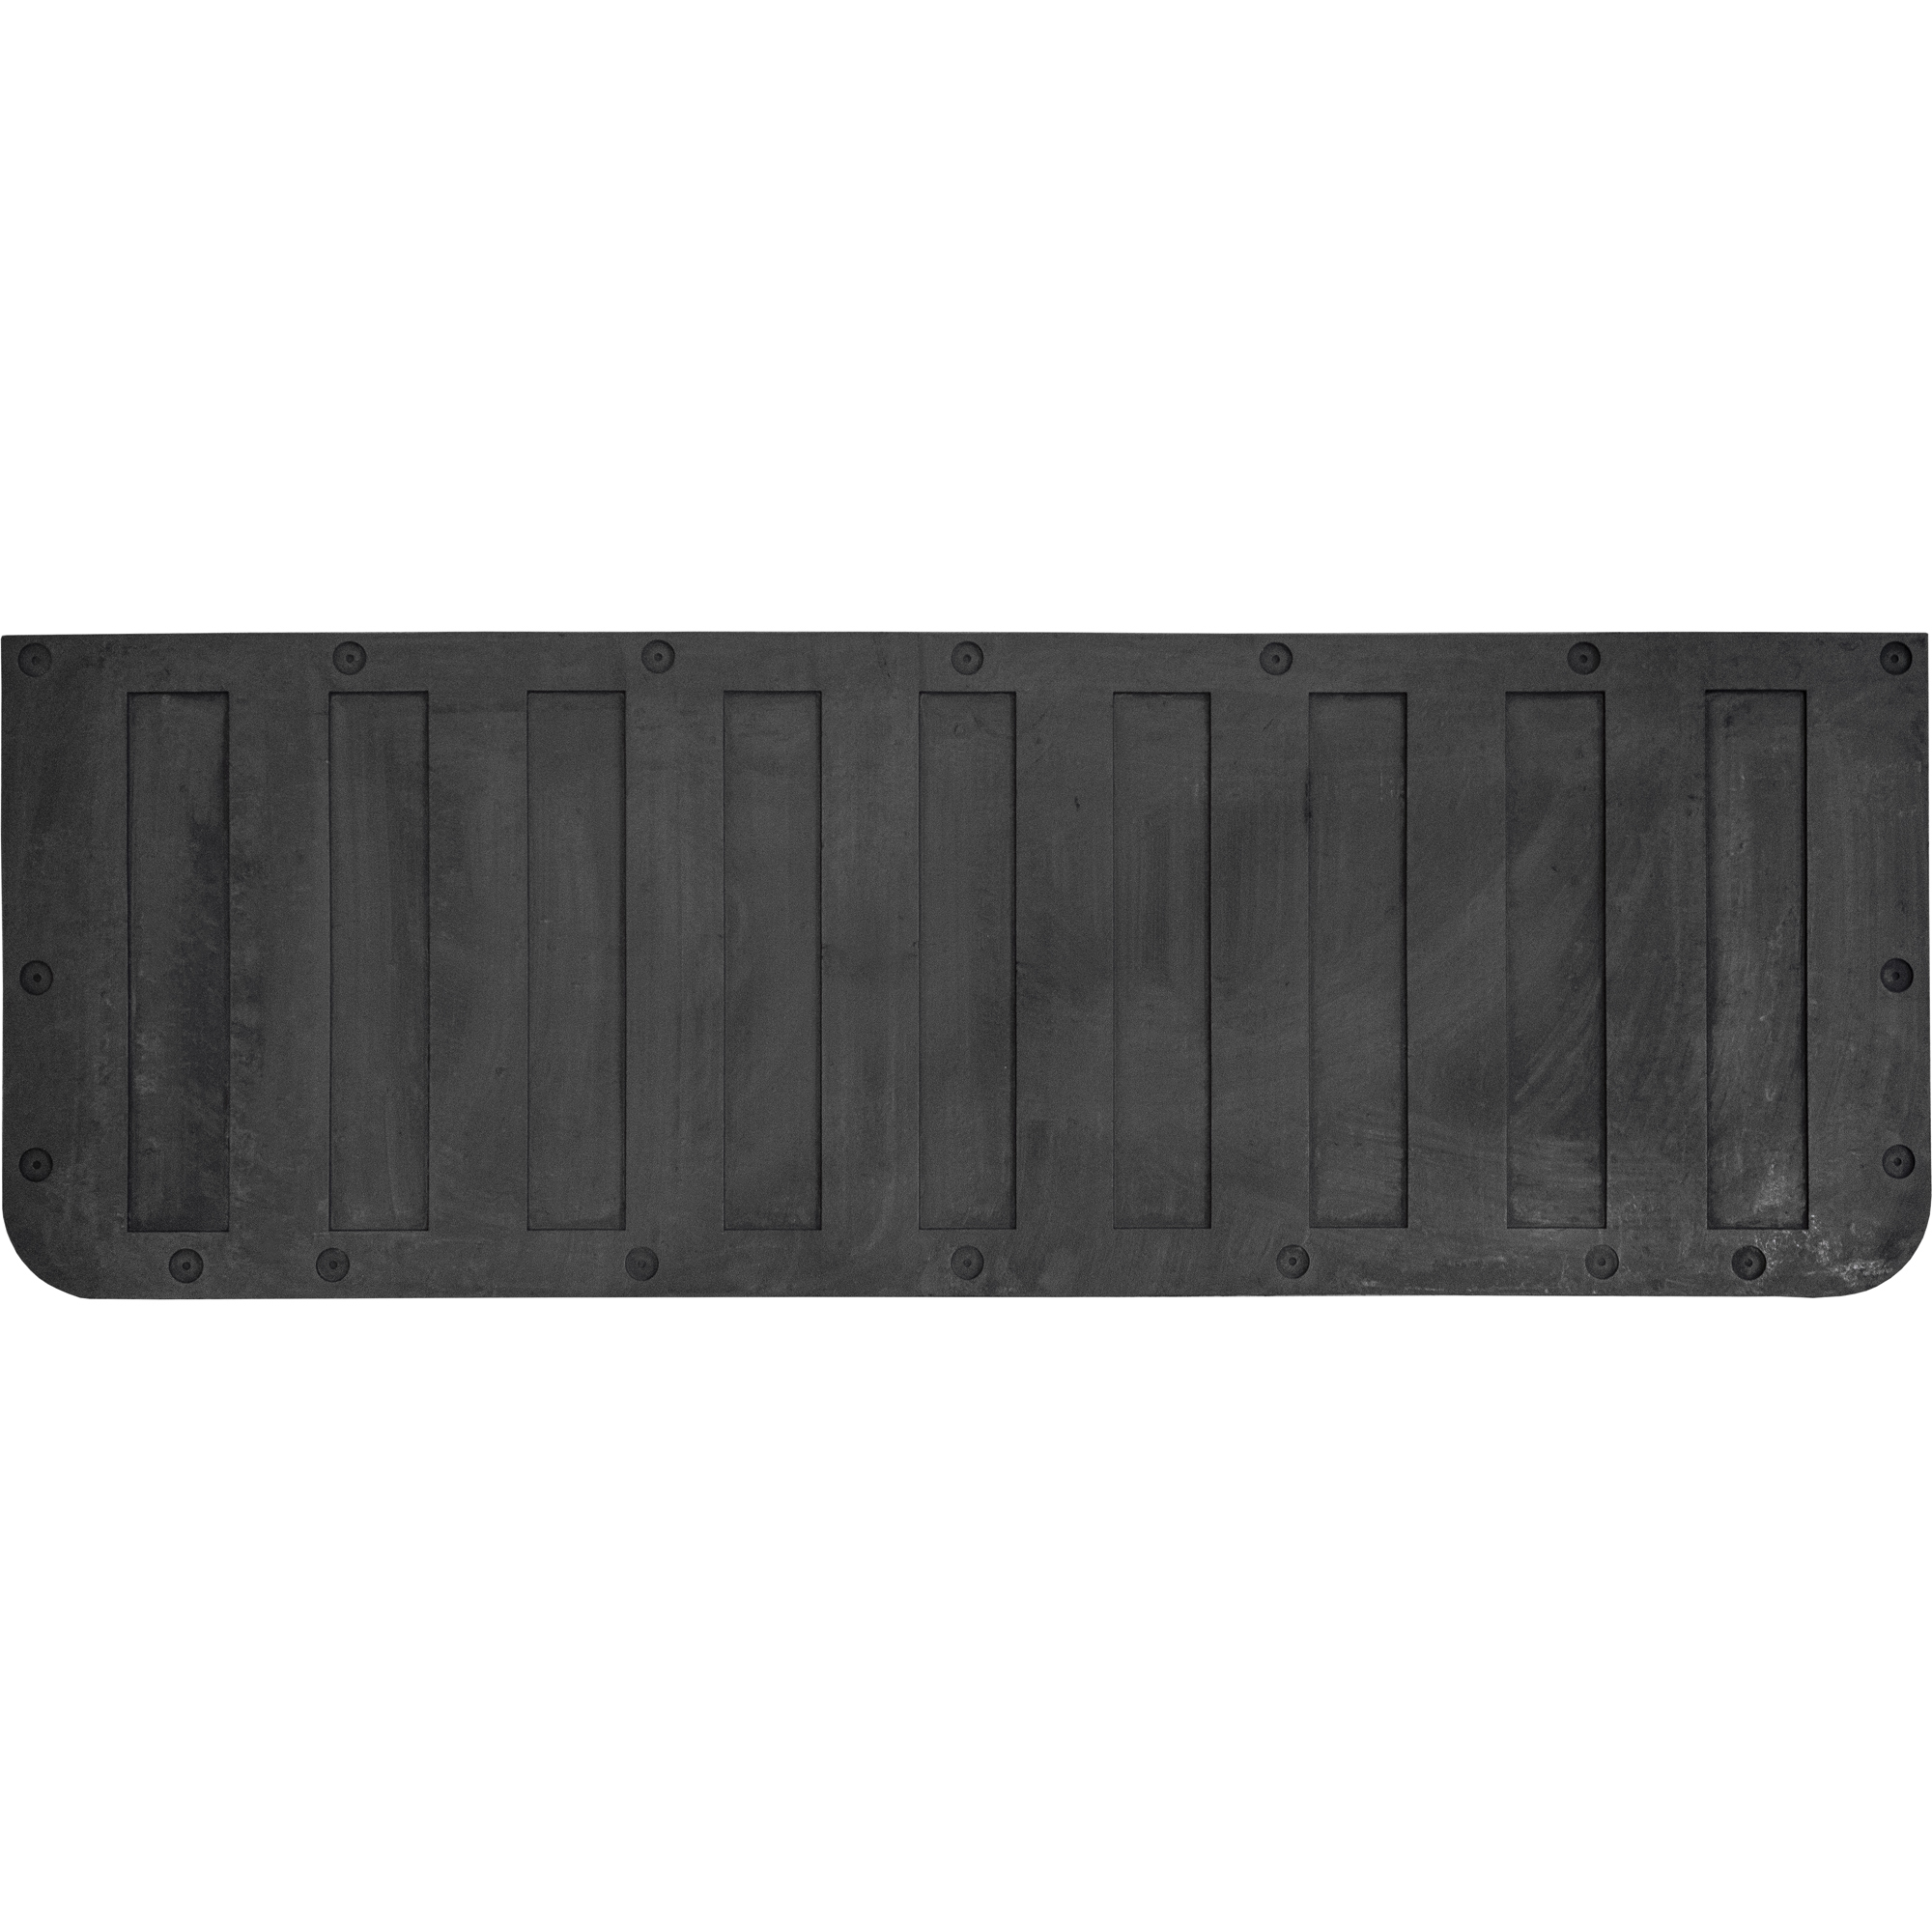 Boomerang Rubber, Fullsize Truck Tailgate Mat, Bed Full-Size, Primary Color Black, Model TM A BAGGED